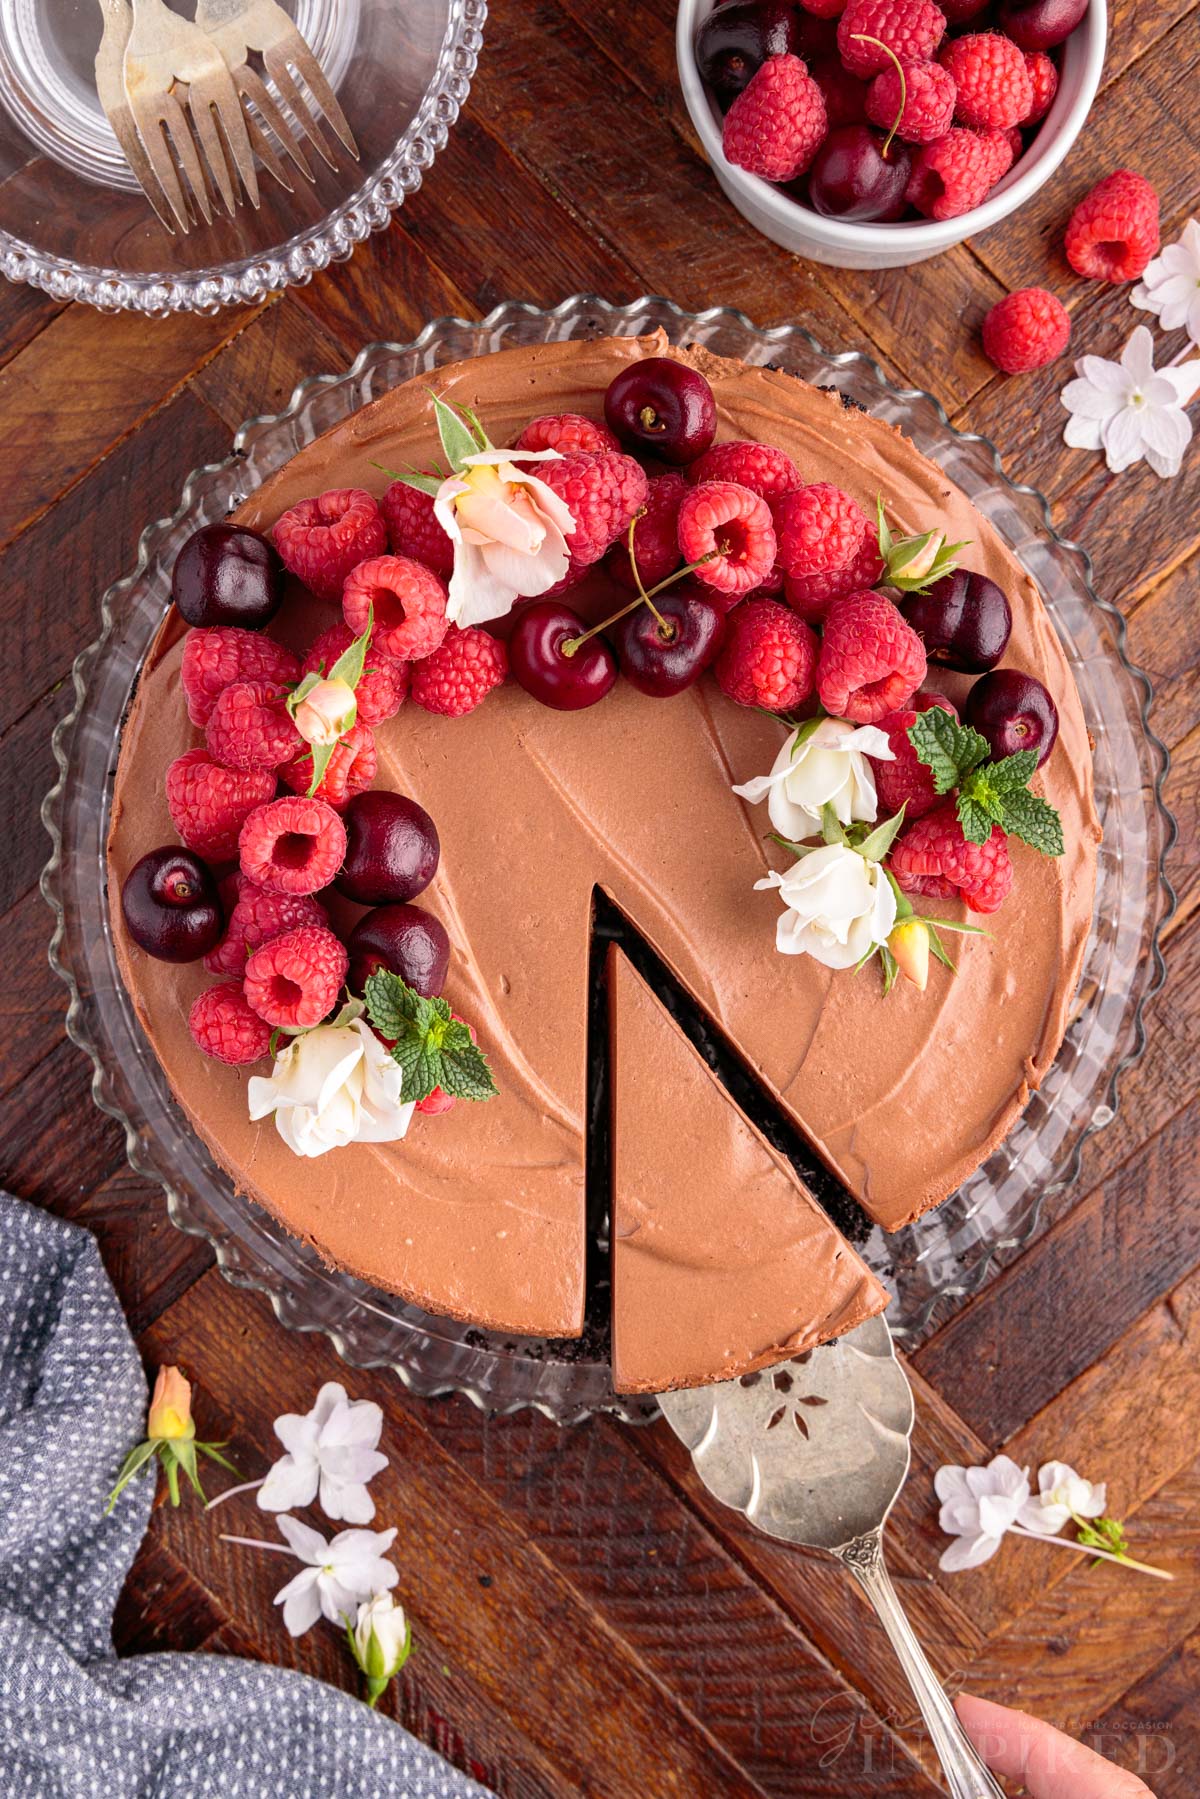 No Bake Chocolate Cheesecake garnished with flowers, cherries, raspberries, and mint leaves, with pie server lifting the first slice.